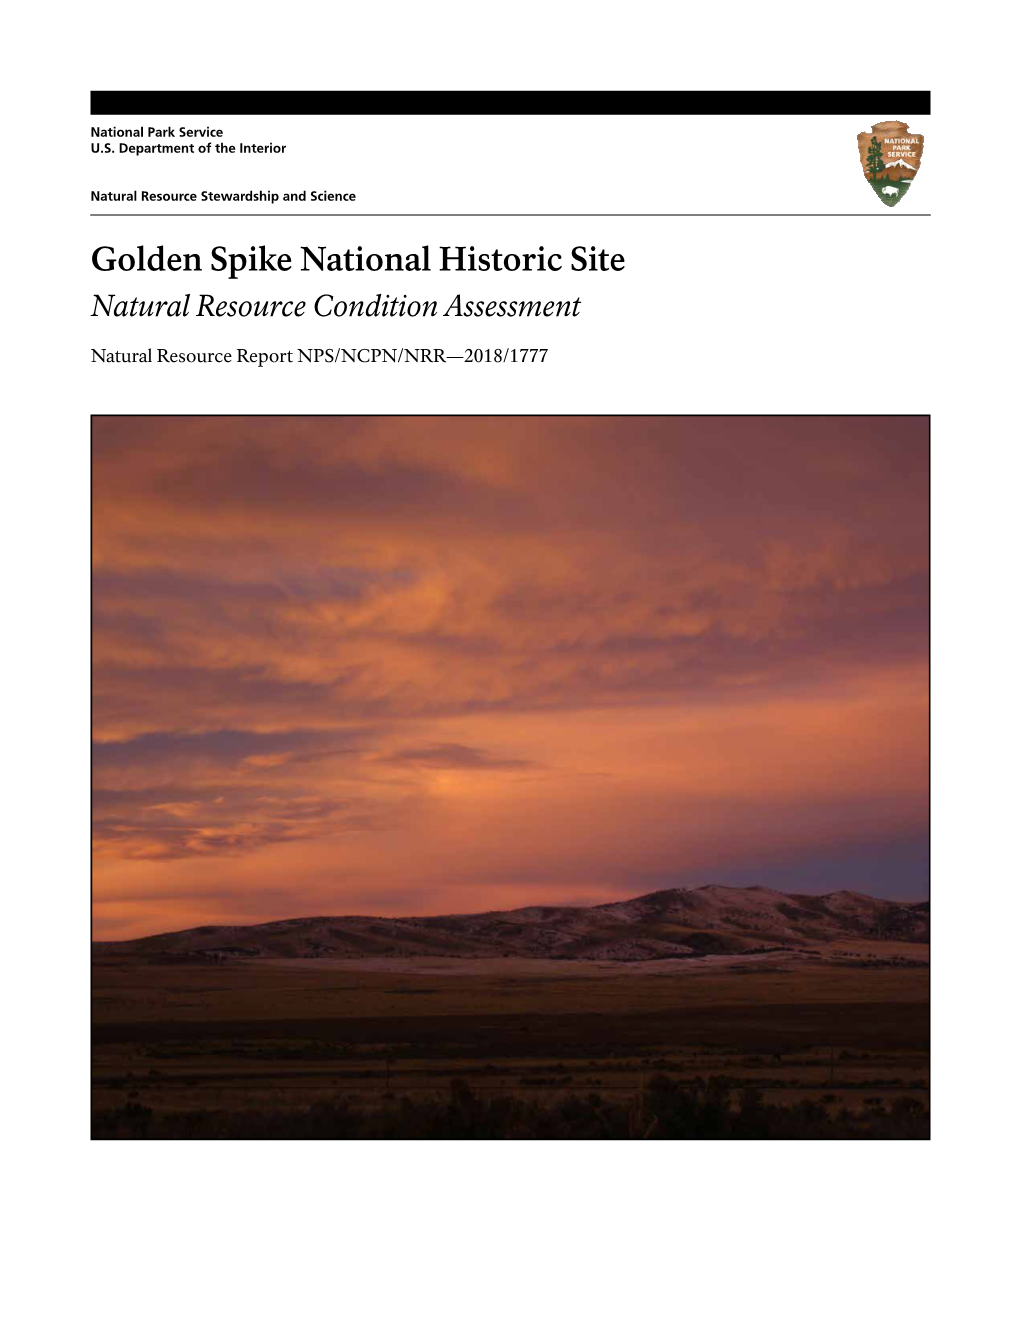 Golden Spike NHS Natural Resource Condition Assessment